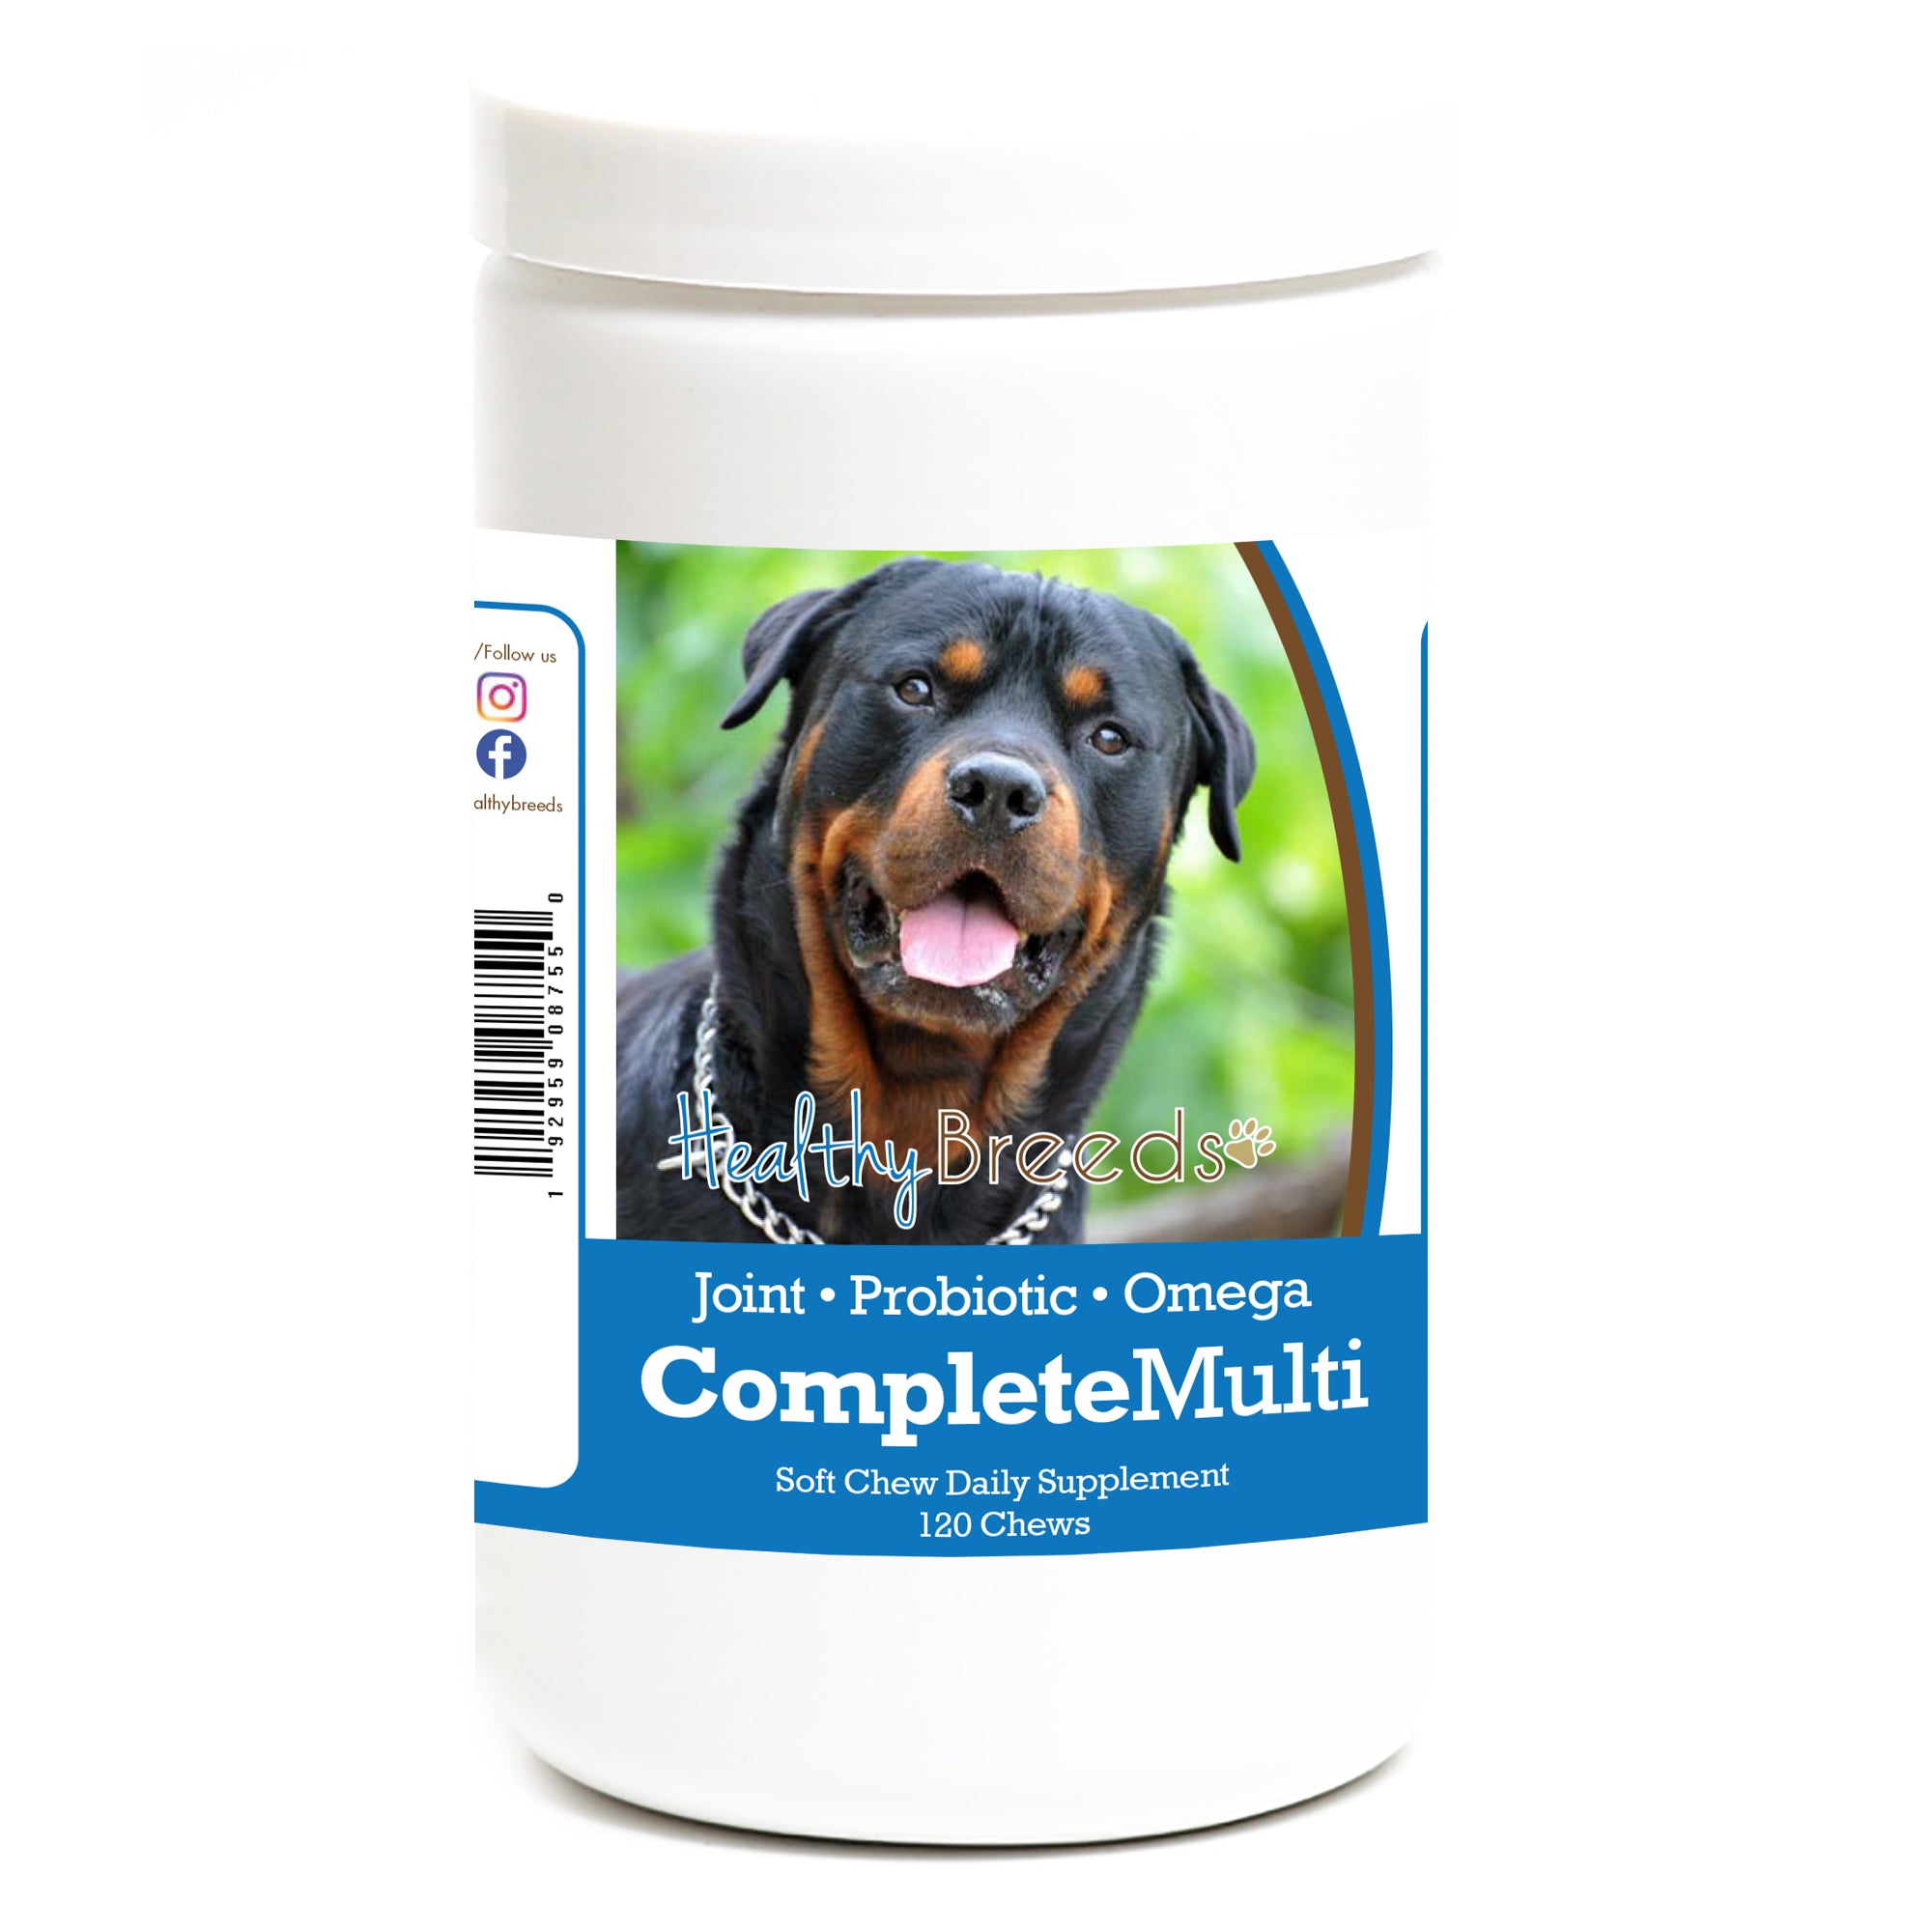 Rottweiler All In One Multivitamin Soft Chew 120 Count